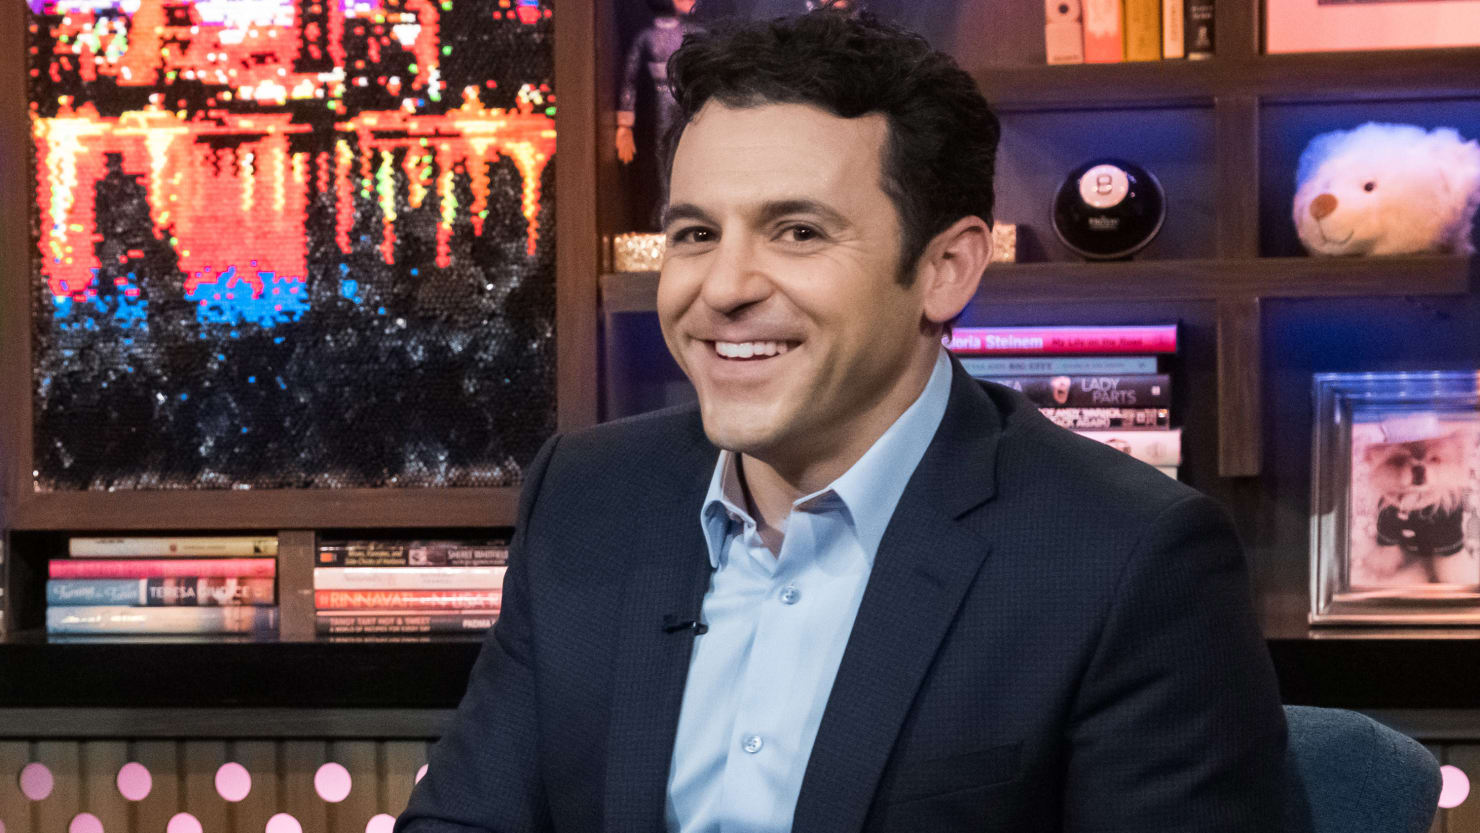 Fred Savage Fired From The Wonder Years Reboot After Misconduct Investigation – The Daily Beast